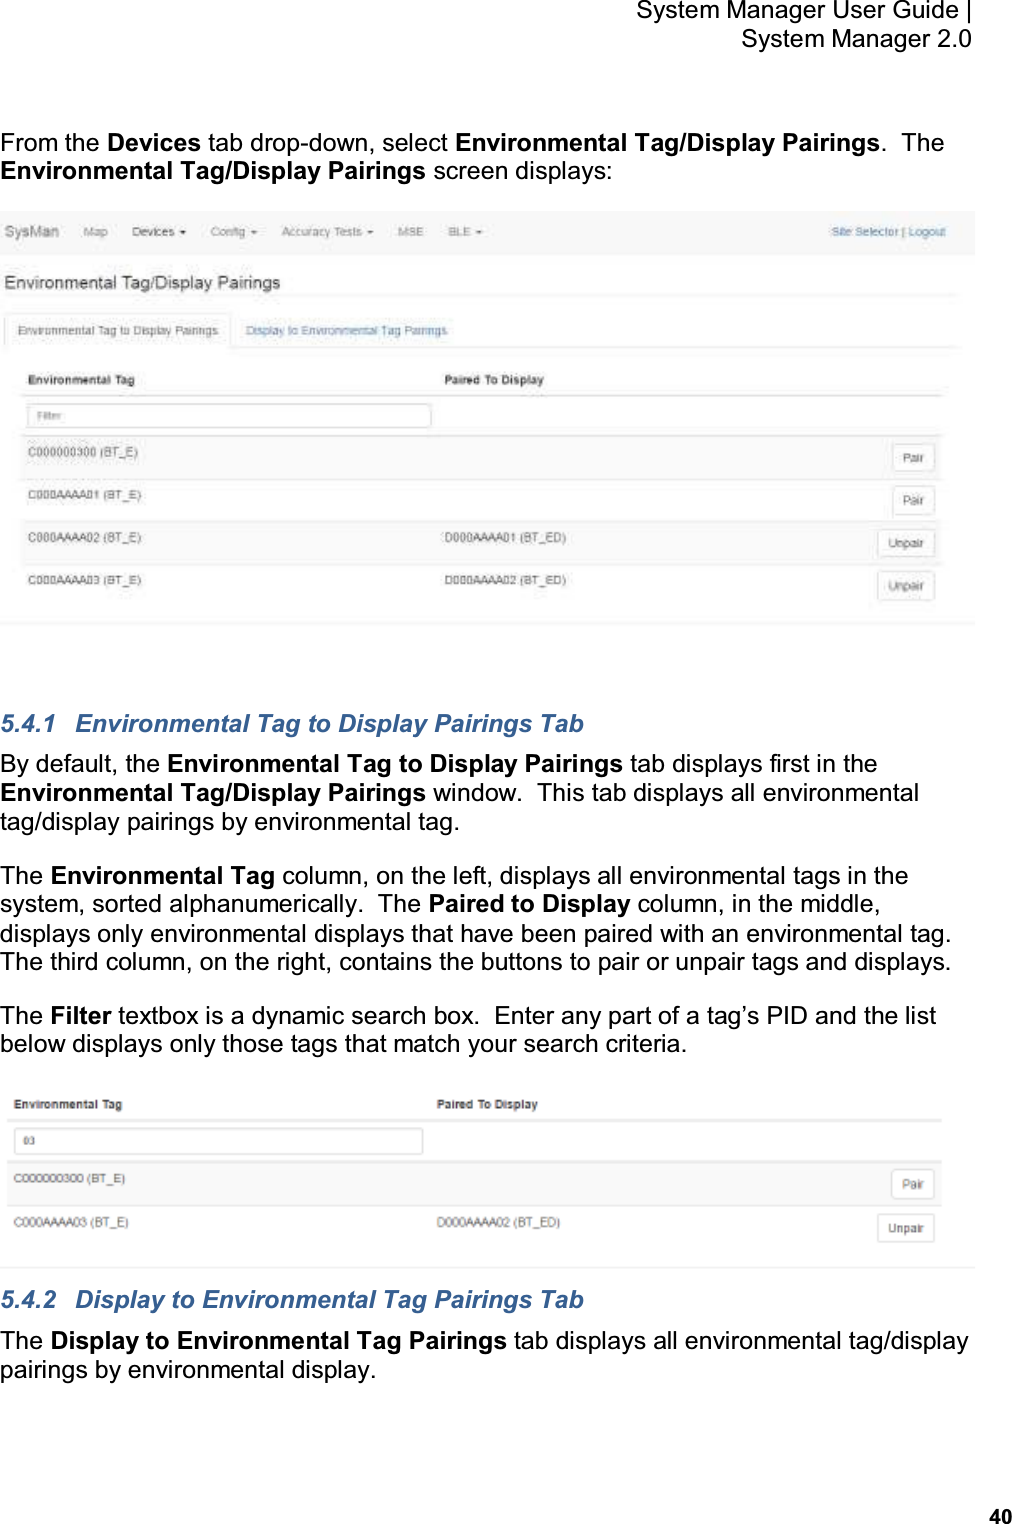           40 System Manager User Guide |  System Manager 2.0 From the Devices tab drop-down, select Environmental Tag/Display Pairings.  The Environmental Tag/Display Pairings screen displays:   5.4.1  Environmental Tag to Display Pairings Tab By default, the Environmental Tag to Display Pairings tab displays first in the Environmental Tag/Display Pairings window.  This tab displays all environmental tag/display pairings by environmental tag. The Environmental Tag column, on the left, displays all environmental tags in the system, sorted alphanumerically.  The Paired to Display column, in the middle, displays only environmental displays that have been paired with an environmental tag.  The third column, on the right, contains the buttons to pair or unpair tags and displays. The Filter textbox is a dynamic search box.  Enter any part of a tag’s PID and the list below displays only those tags that match your search criteria.  5.4.2  Display to Environmental Tag Pairings Tab The Display to Environmental Tag Pairings tab displays all environmental tag/display pairings by environmental display. 